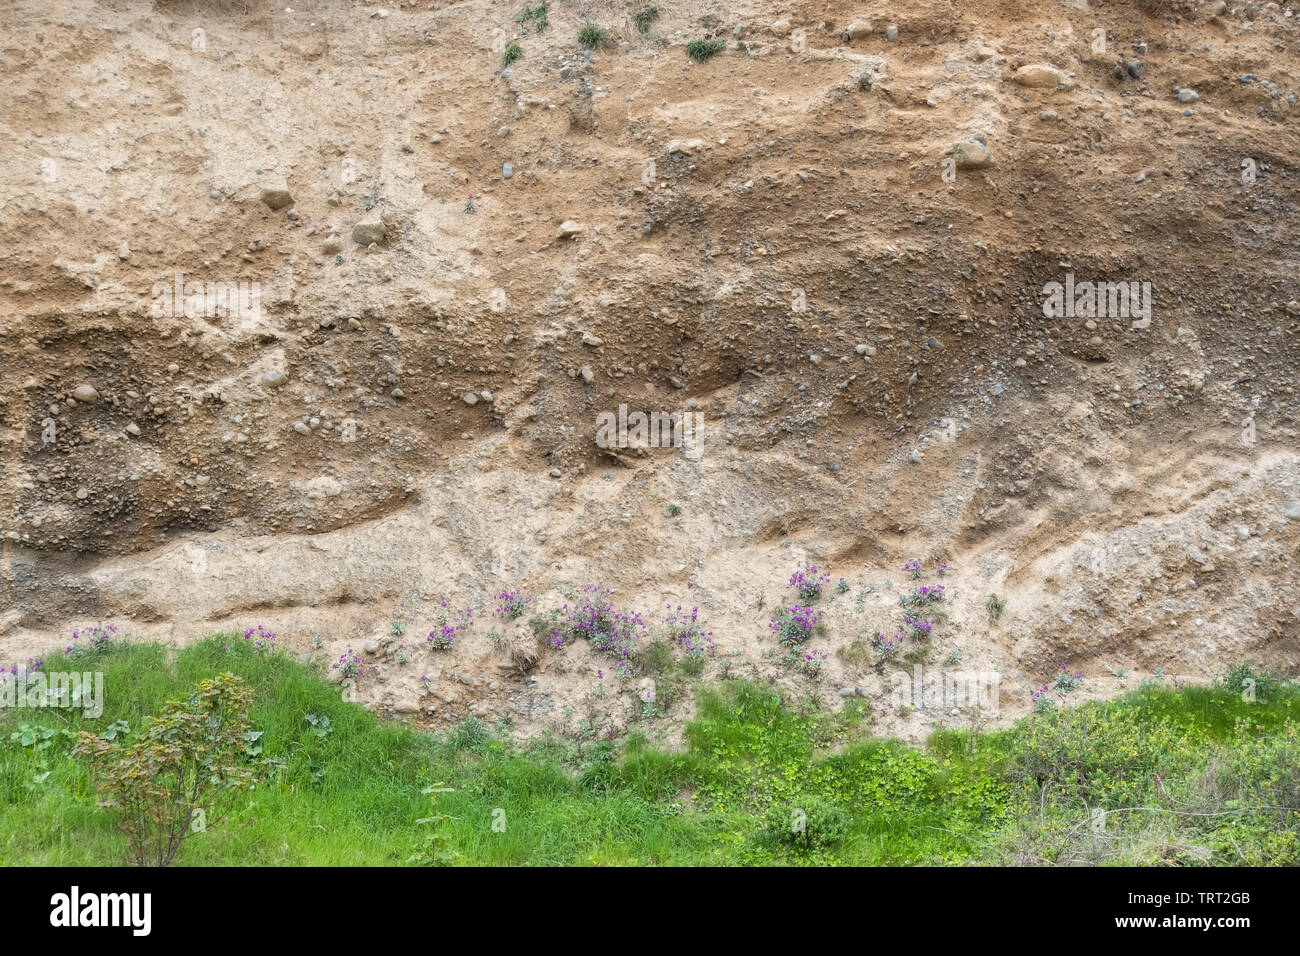 Detail of glacial drift deposit formed during the last Ice Age and now forming the vegetated sea cliff at Killiney Beach, County Dublin, Ireland Stock Photo